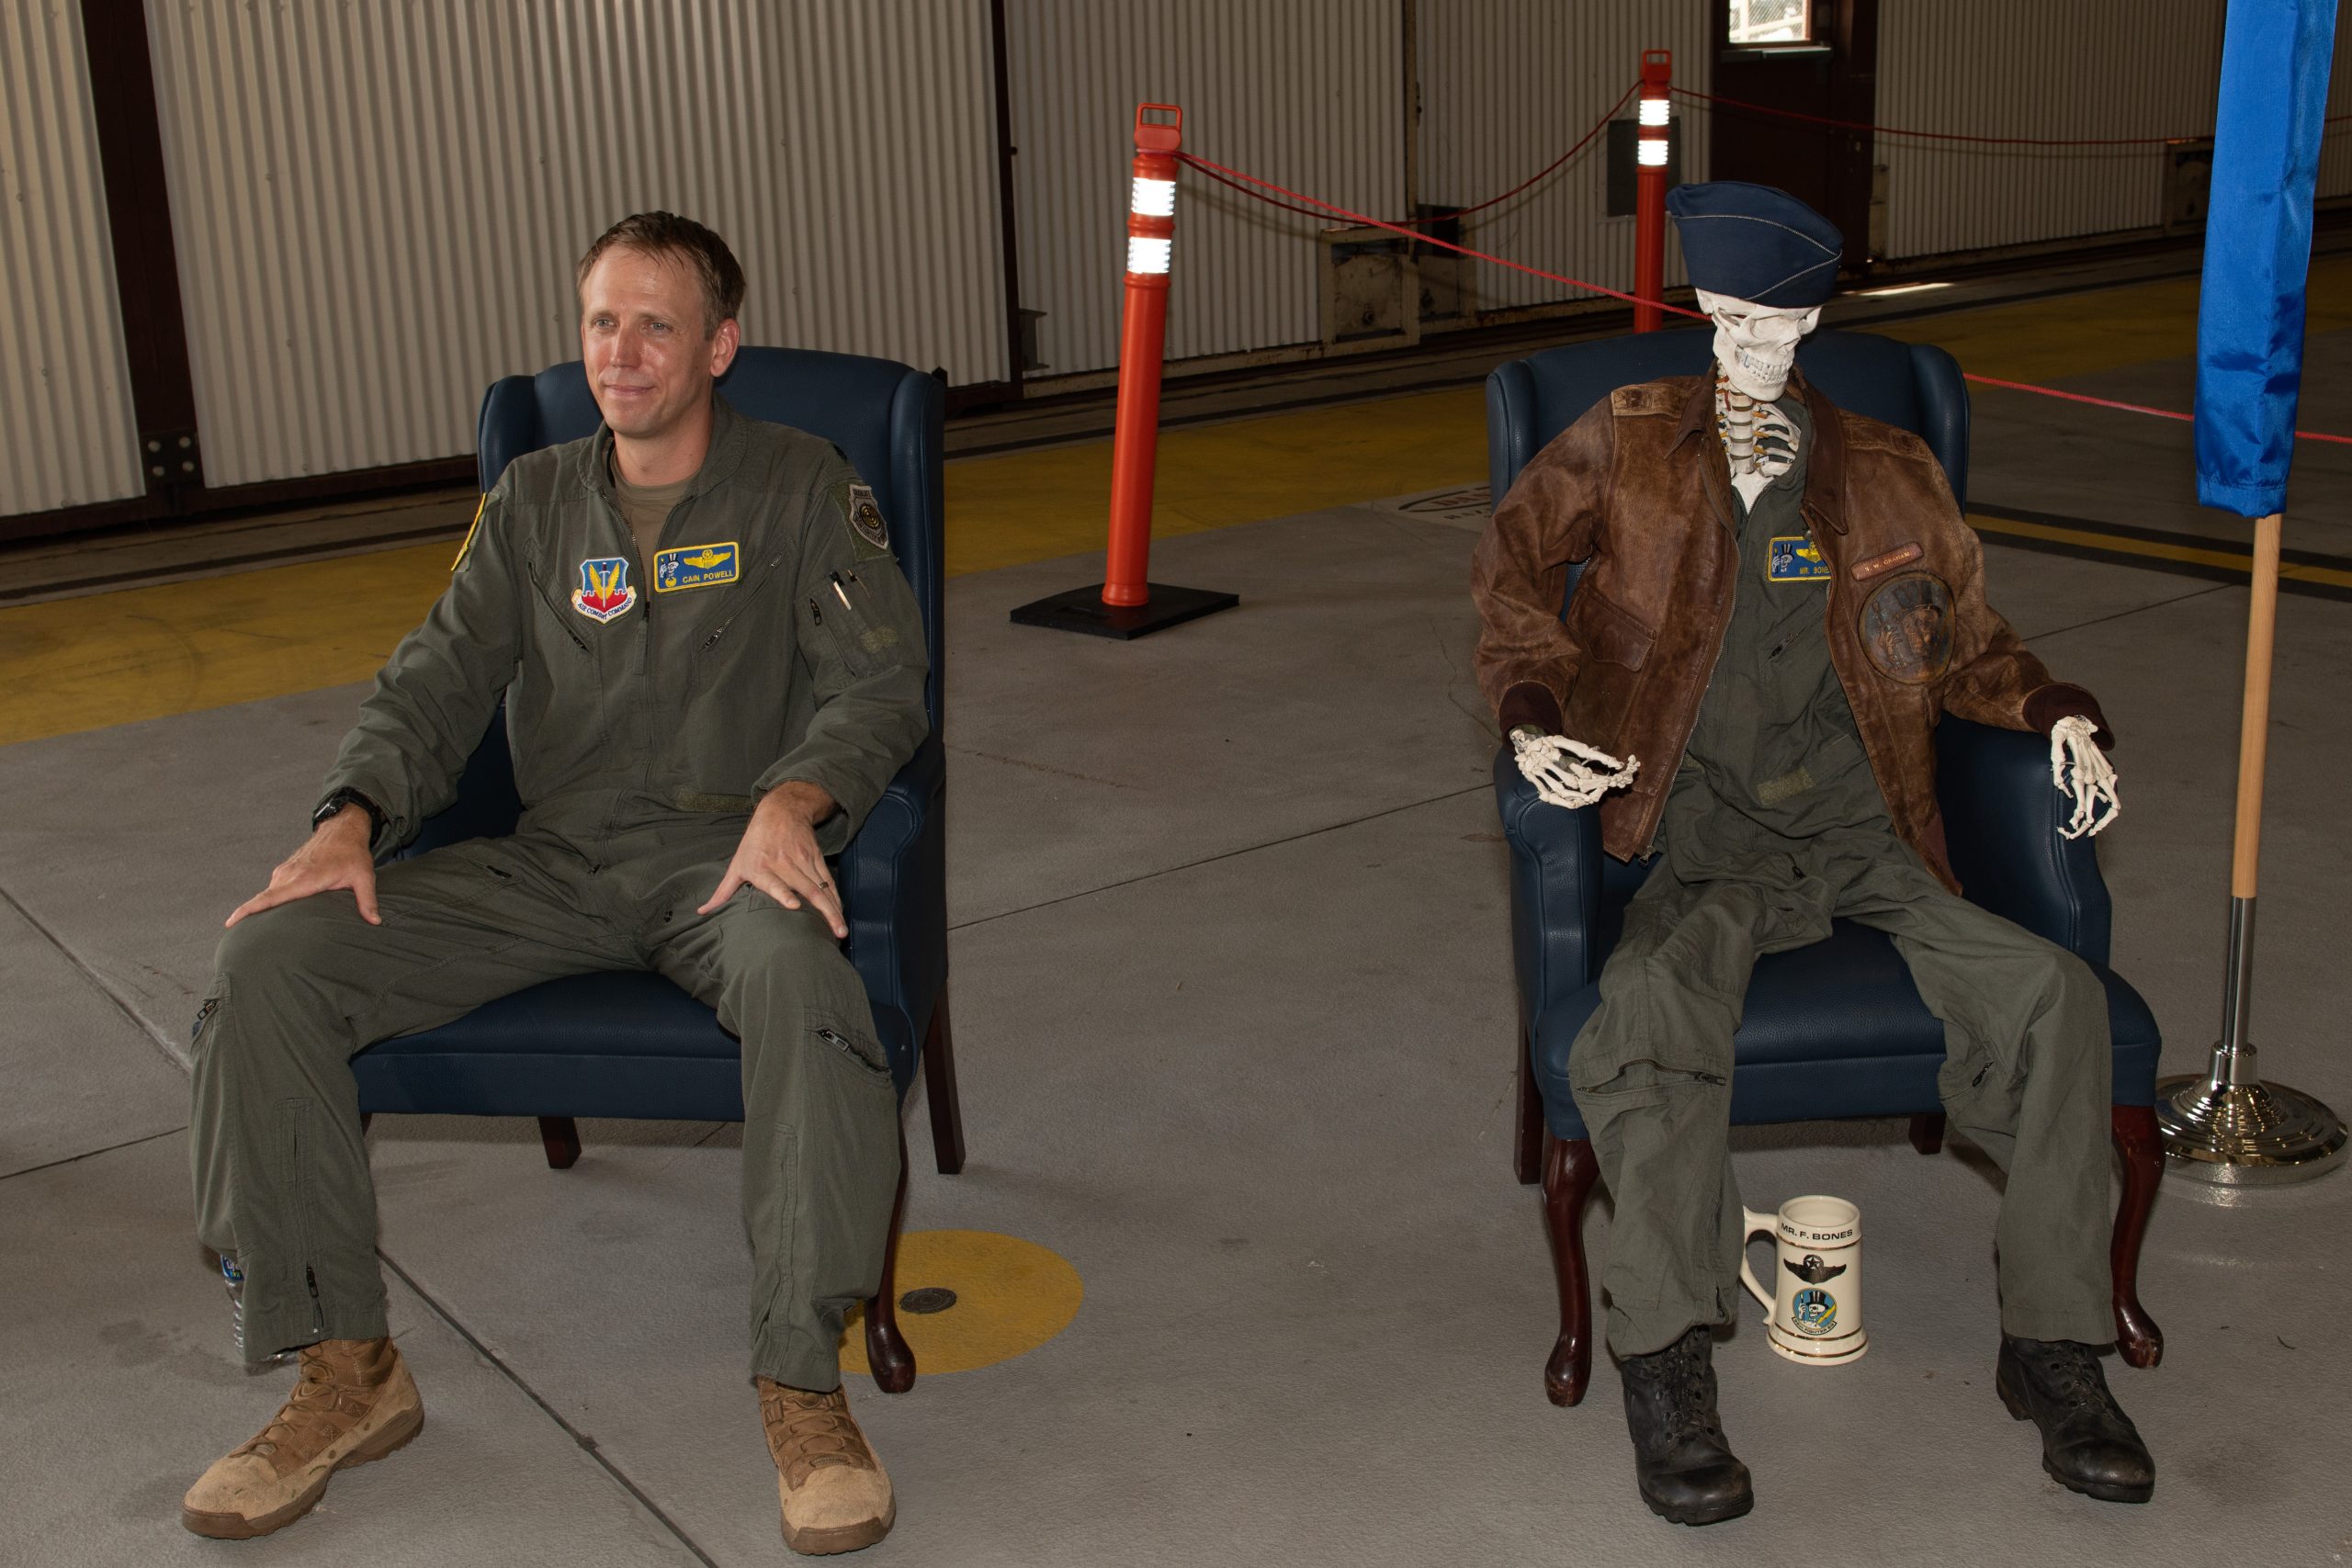 Historic ‘Boneheads’ Squadron Reactivated at Tyndall, With F-35s Coming in August